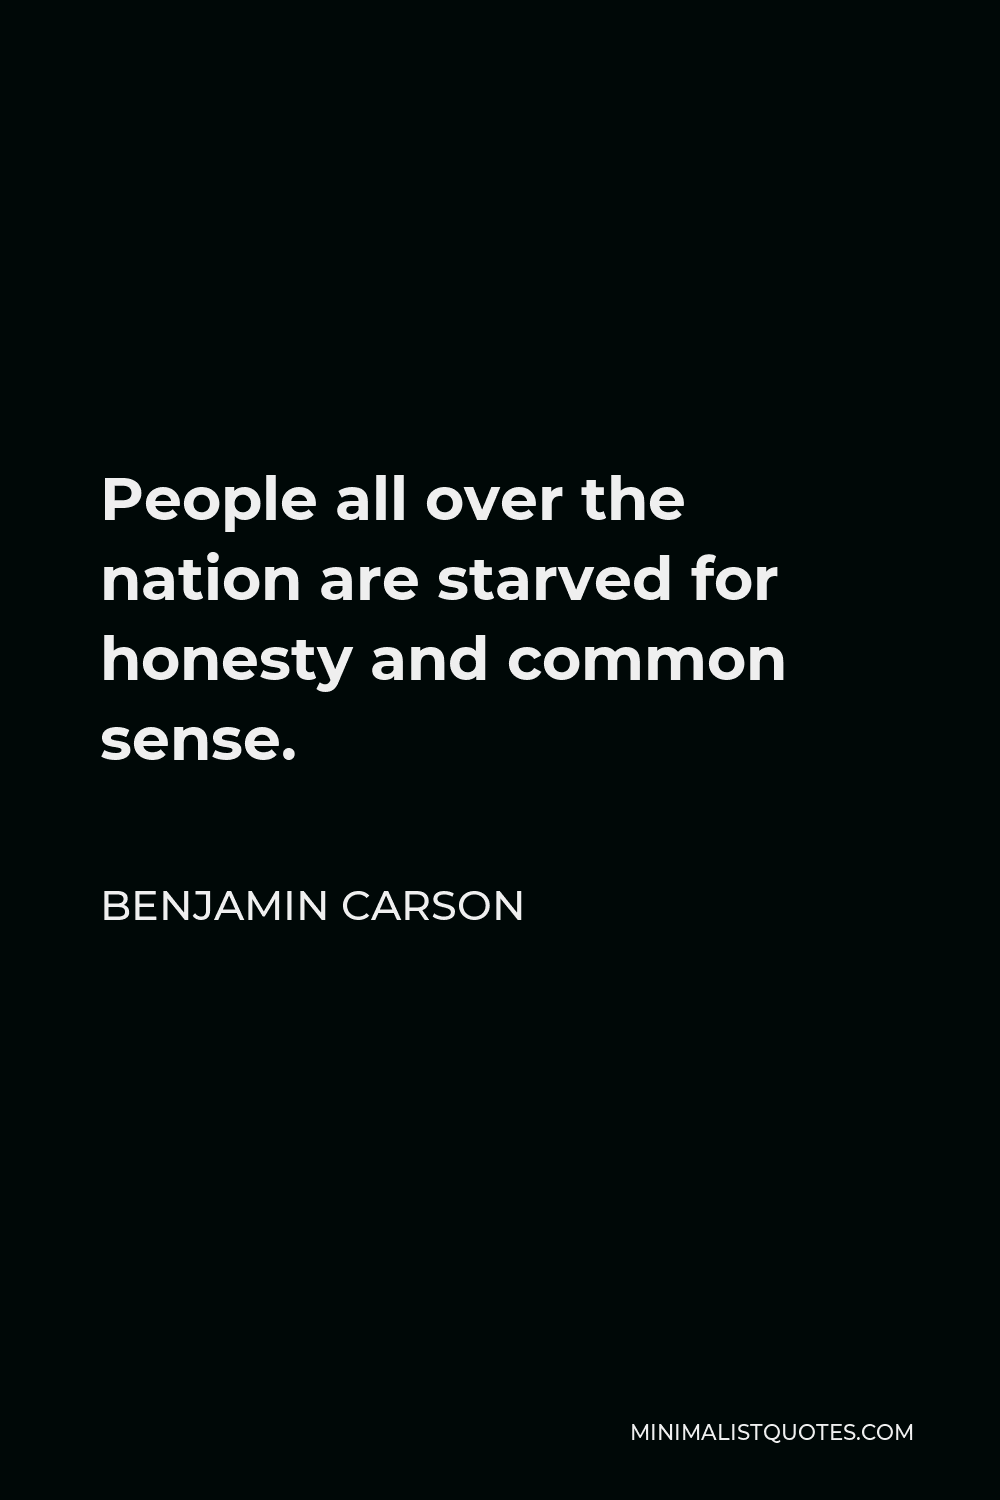 Benjamin Carson Quote - People all over the nation are starved for honesty and common sense.